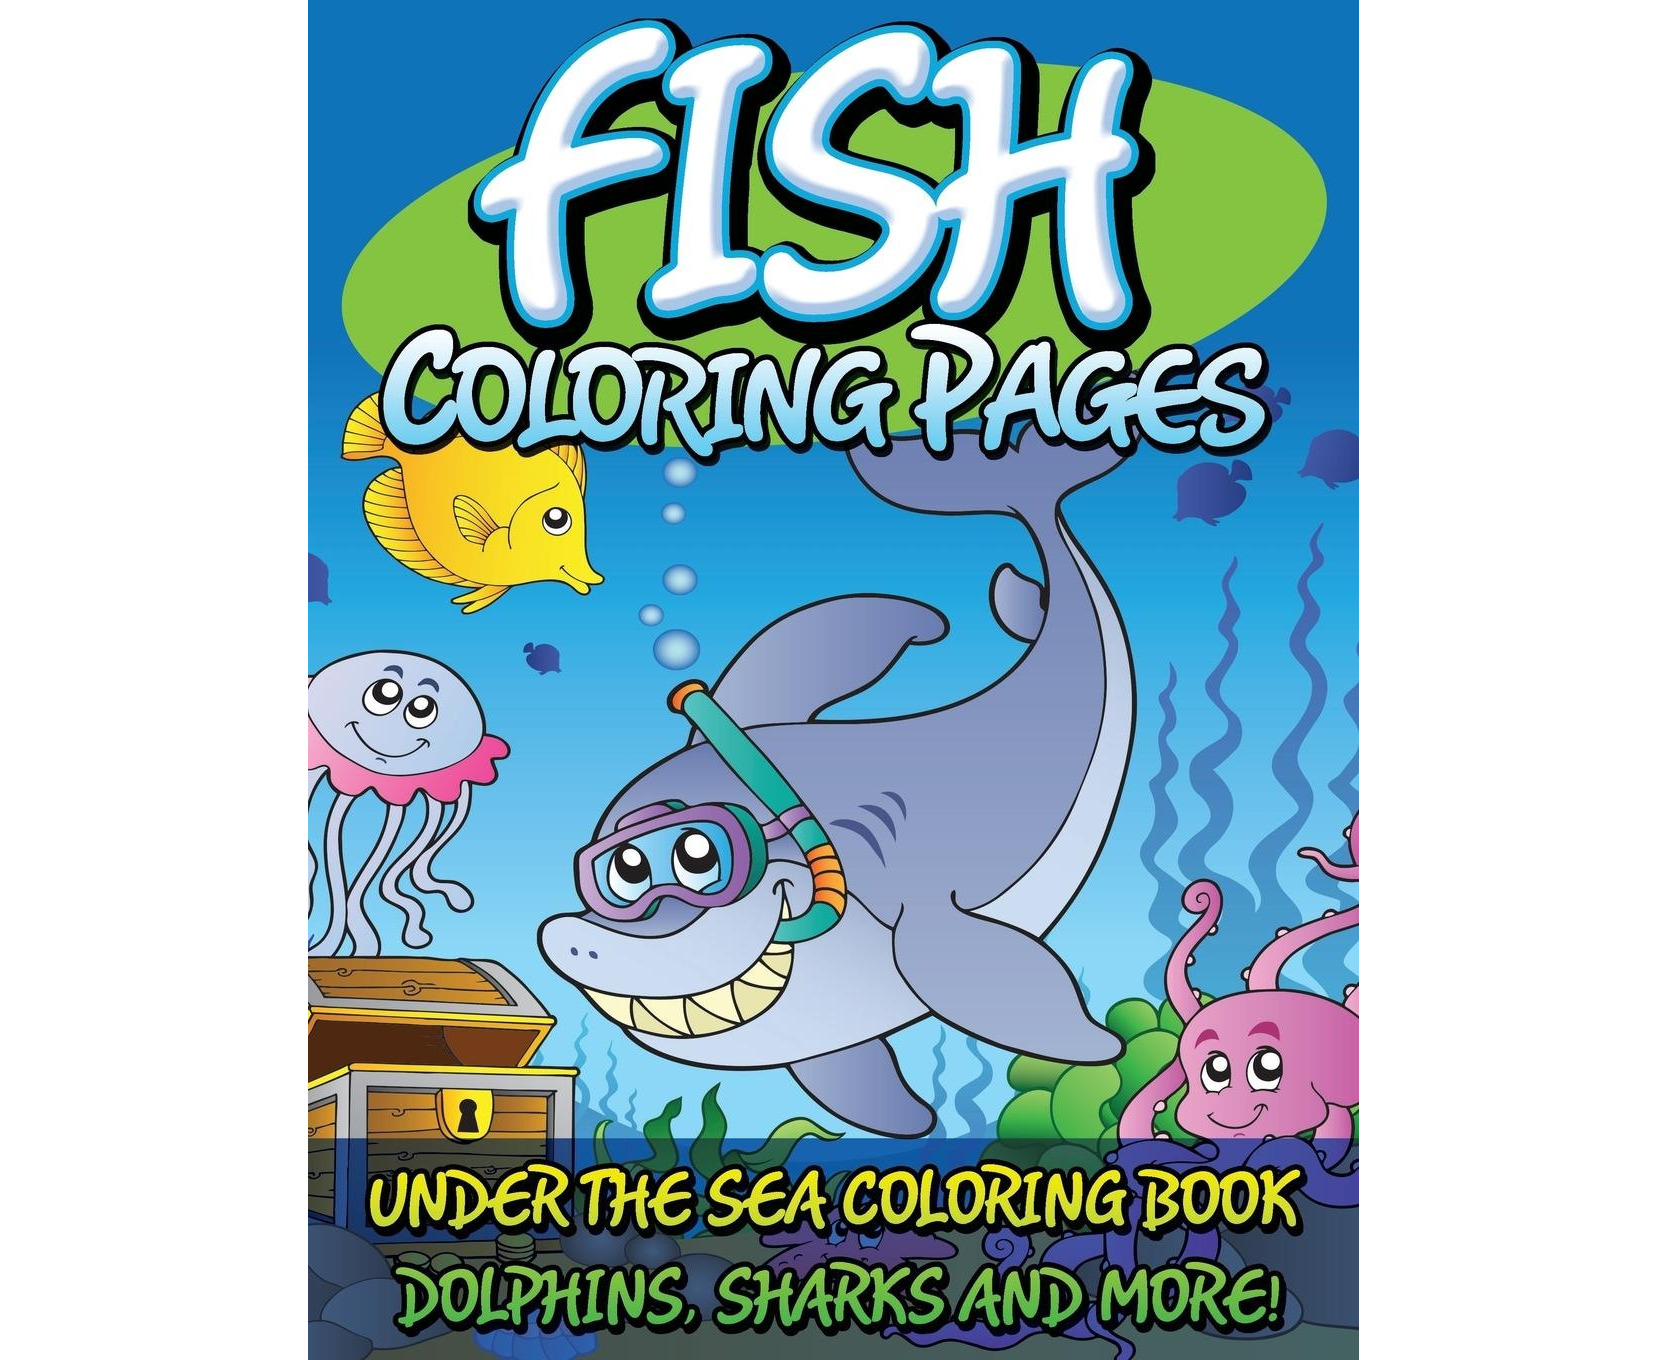 Fish coloring pages under the sea coloring book